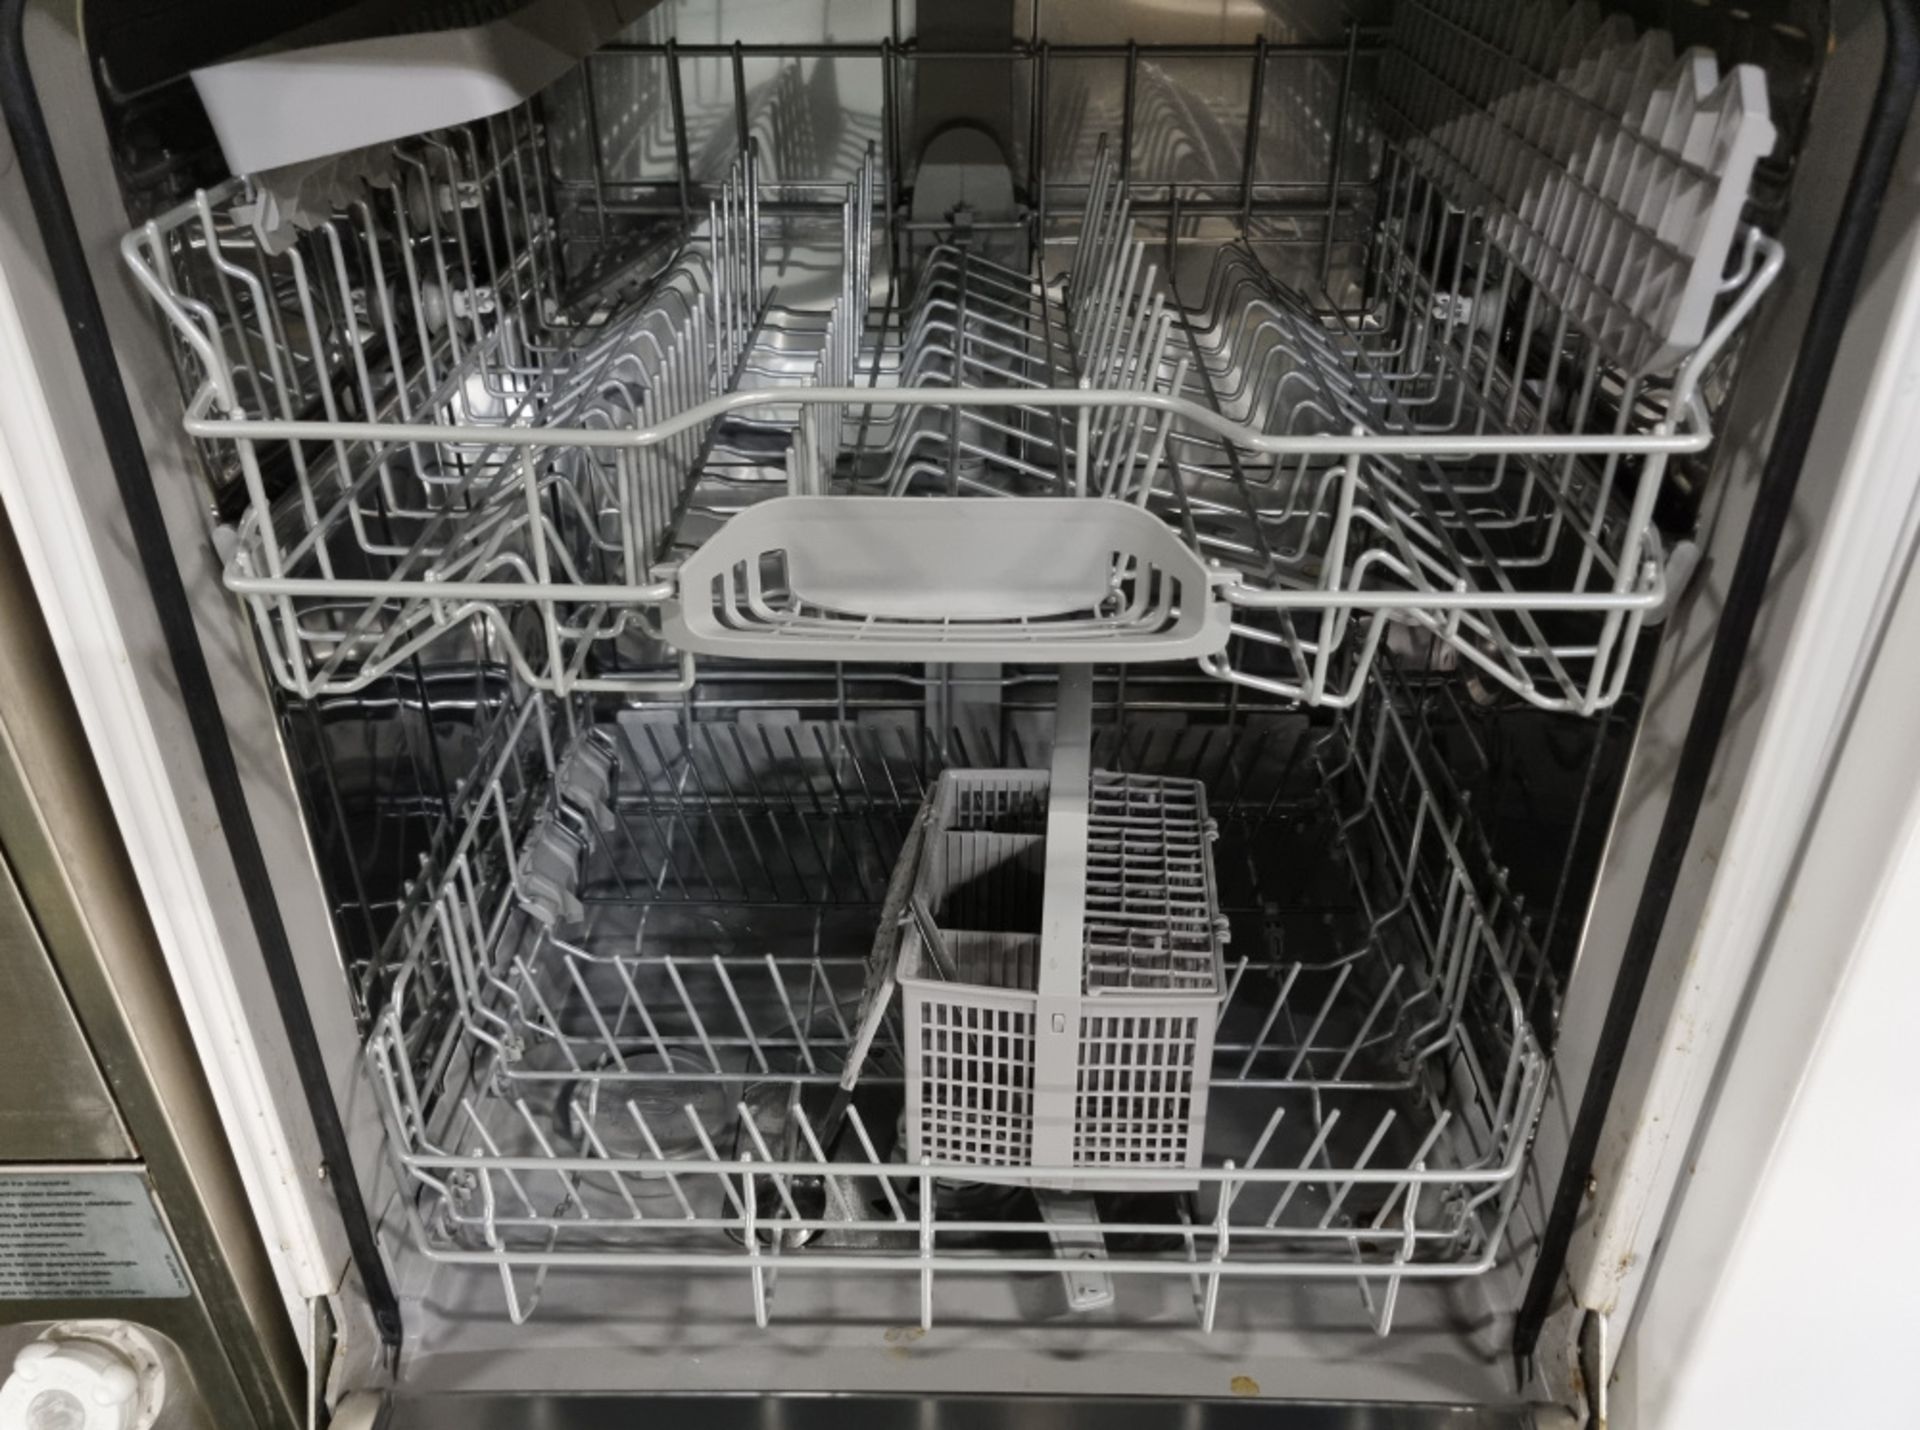 Bosch Serie 2 Silence Plus freestanding dishwasher, Model number - SMS25EW00G - 60x60x85cm - Image 4 of 6